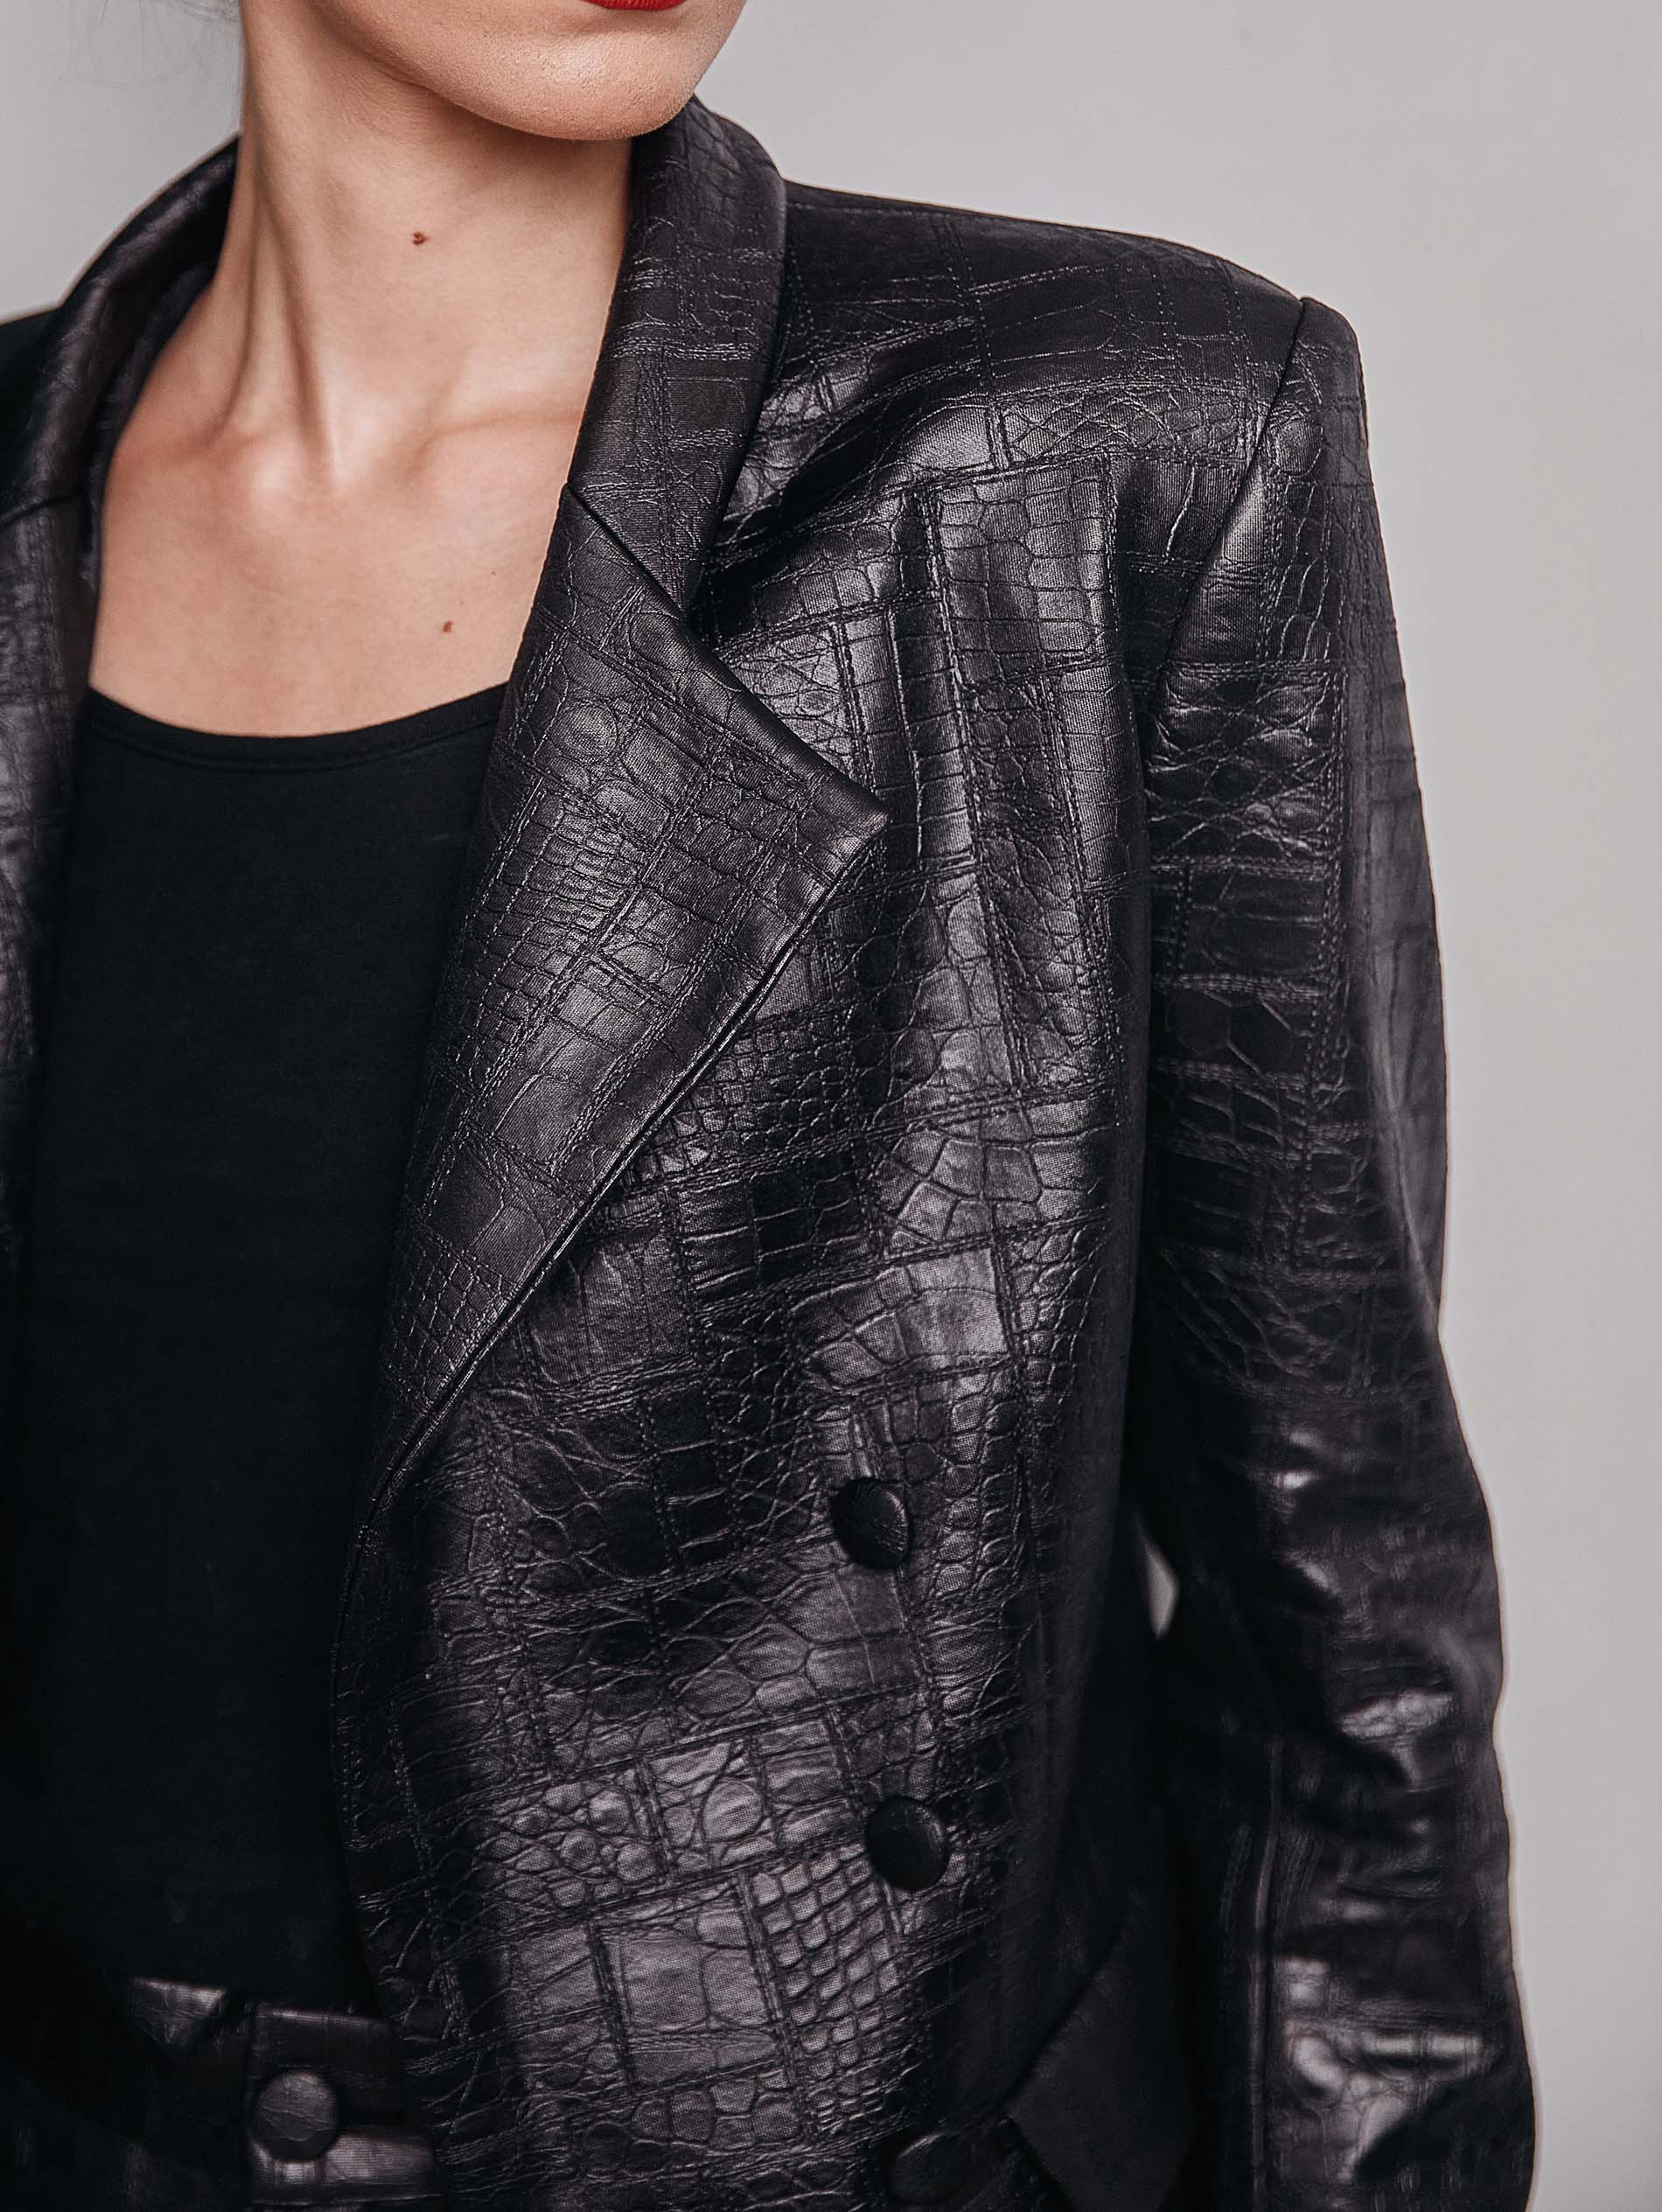 Textured double breasted blazer and Textured black pant look